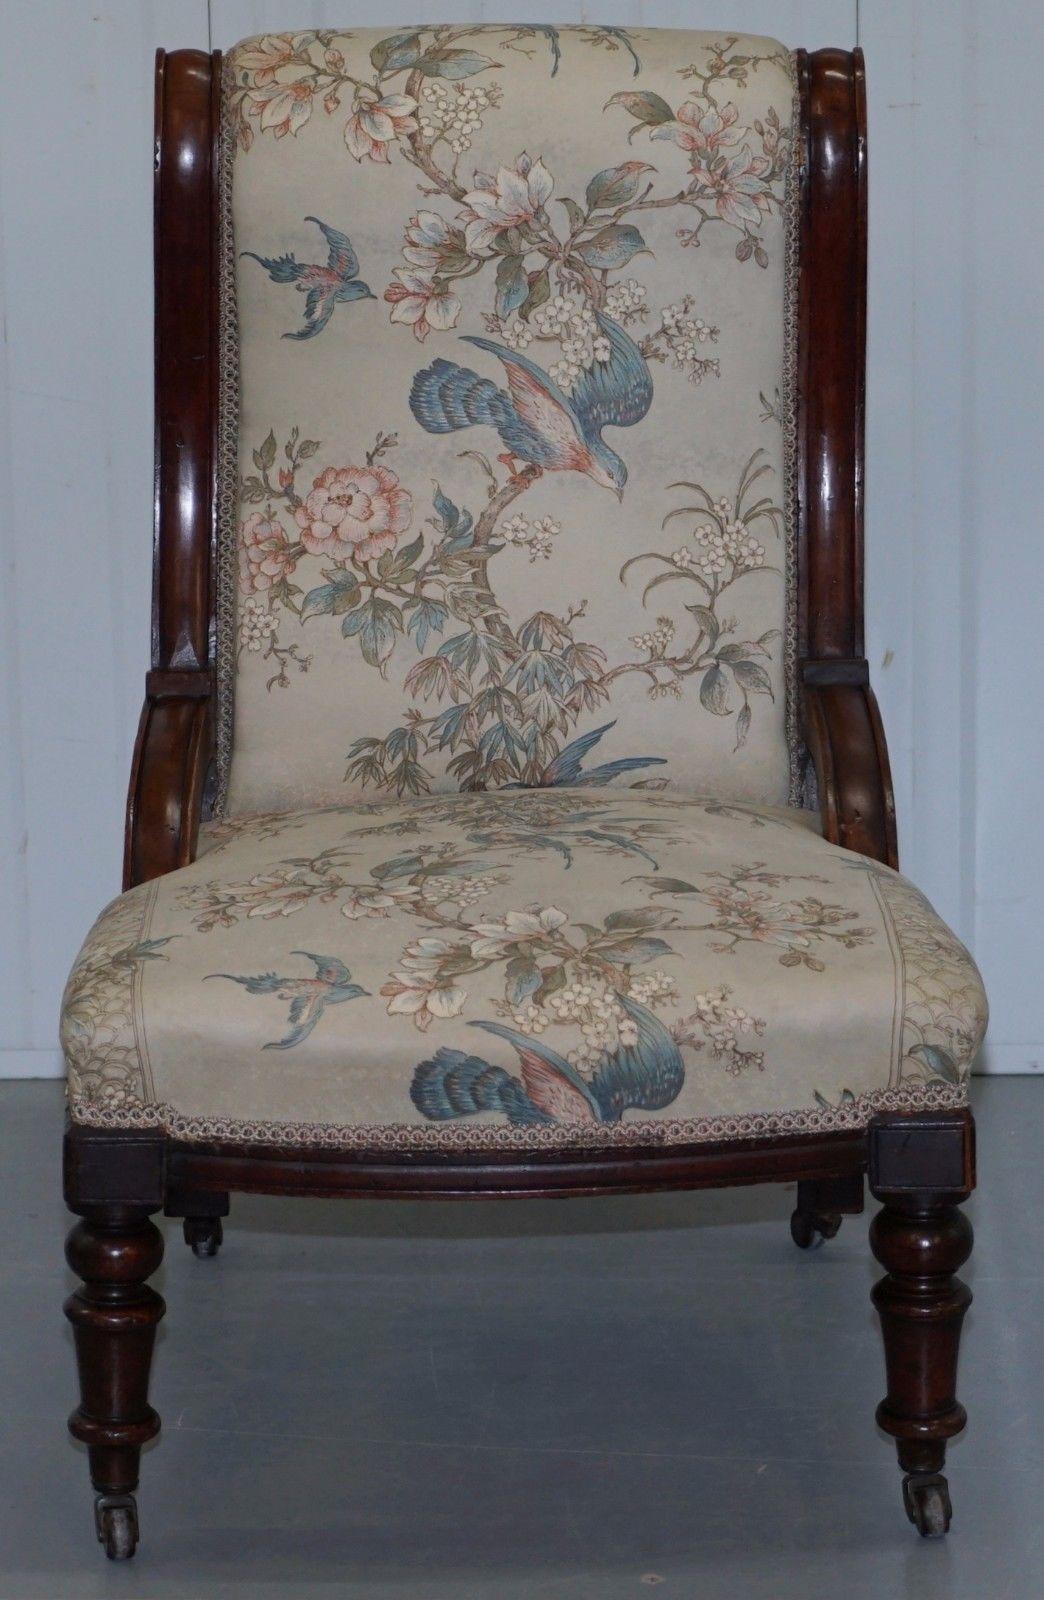 We are delighted to offer for sale this lovely Victorian library, reading or nursing chair with a mahogany frame and satin cotton floral and bird detailed upholstery, part of a four piece suite

As mentioned this is part of a suite, I have this